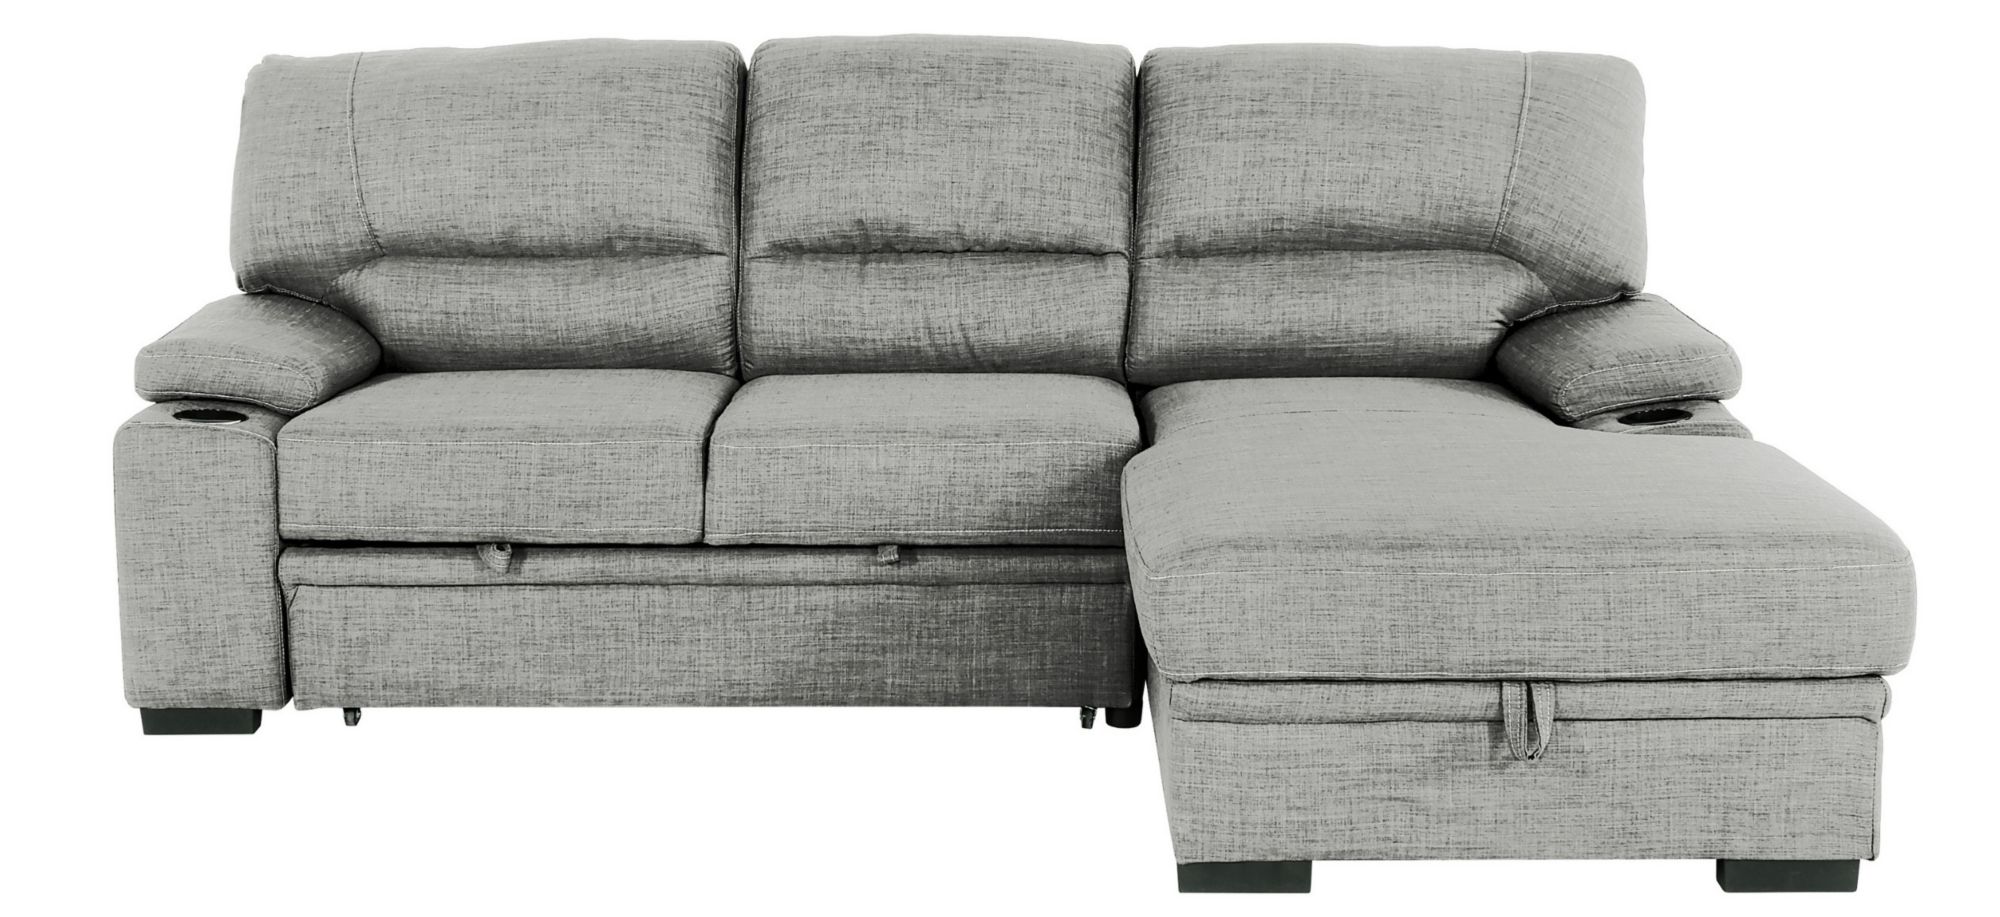 Gallo 2 Piece Sectional Sleeper Sofa with Storage in Russel Light Grey by Primo International